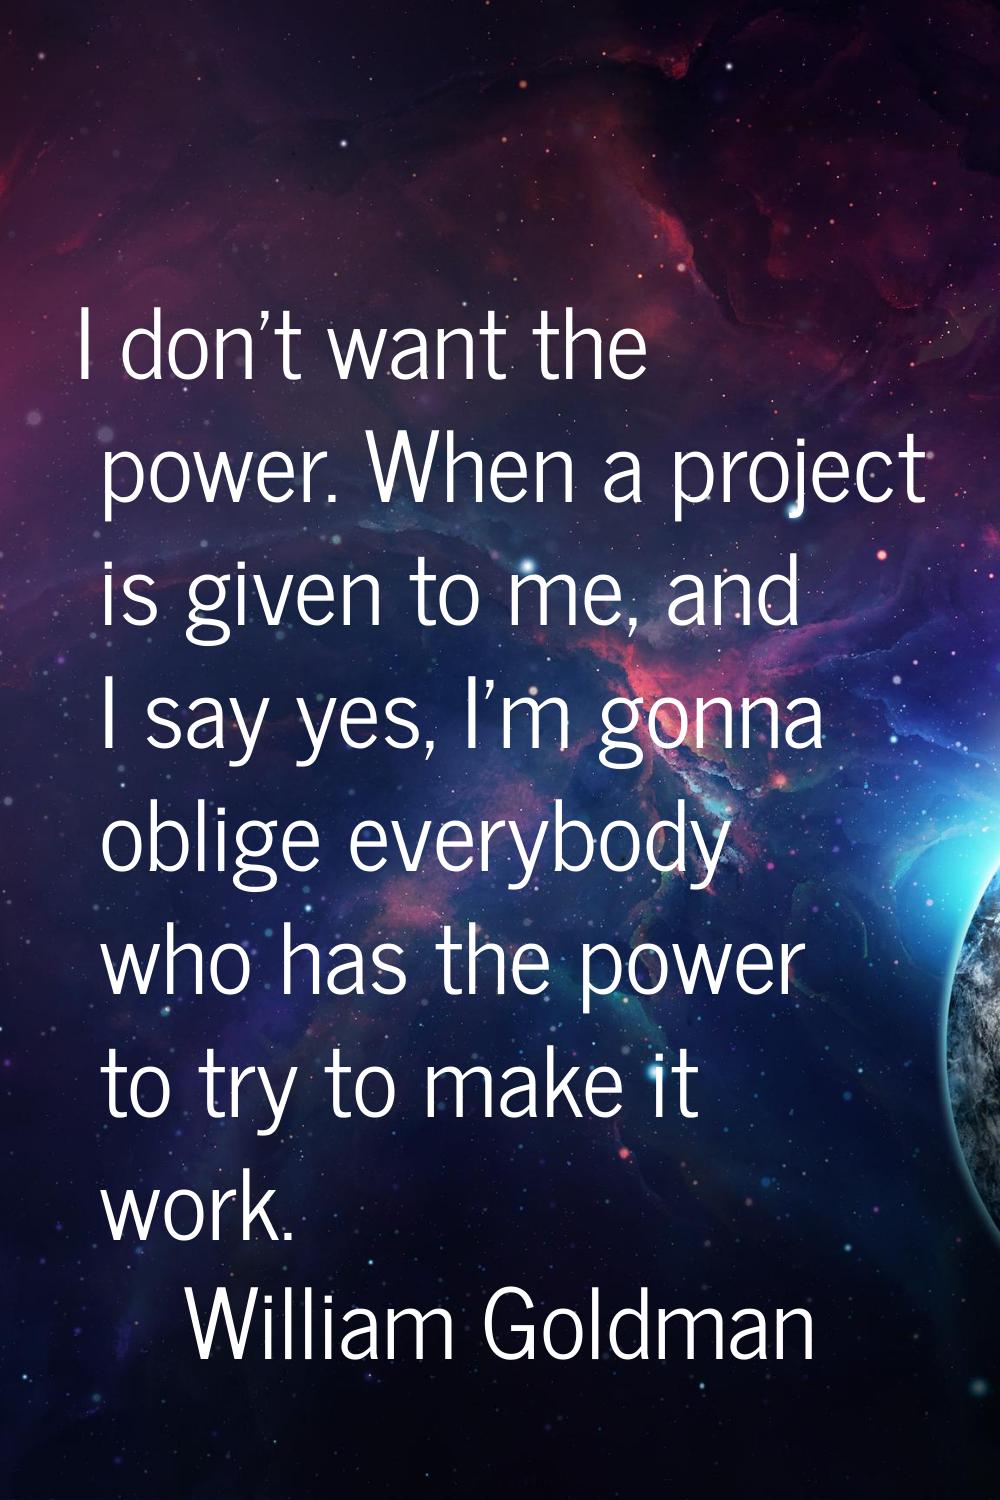 I don't want the power. When a project is given to me, and I say yes, I'm gonna oblige everybody wh